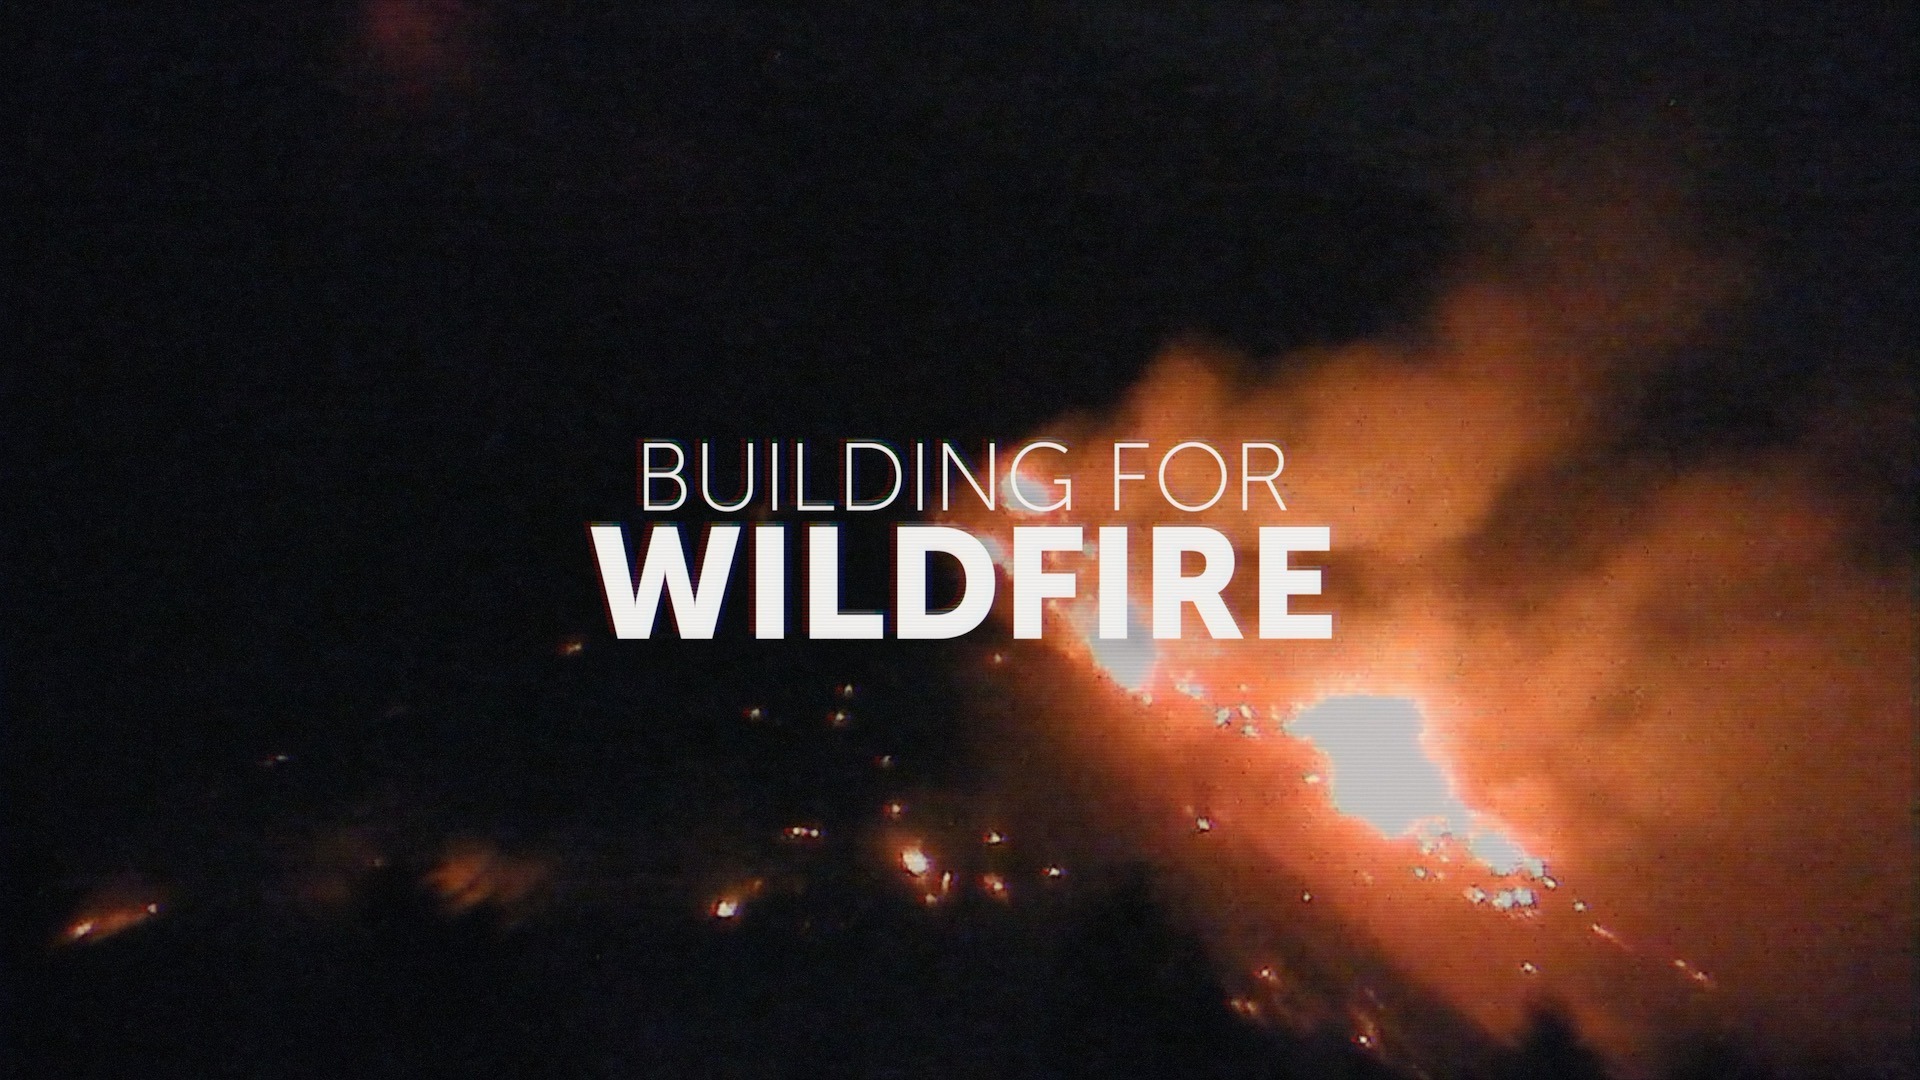 Building for wildfire